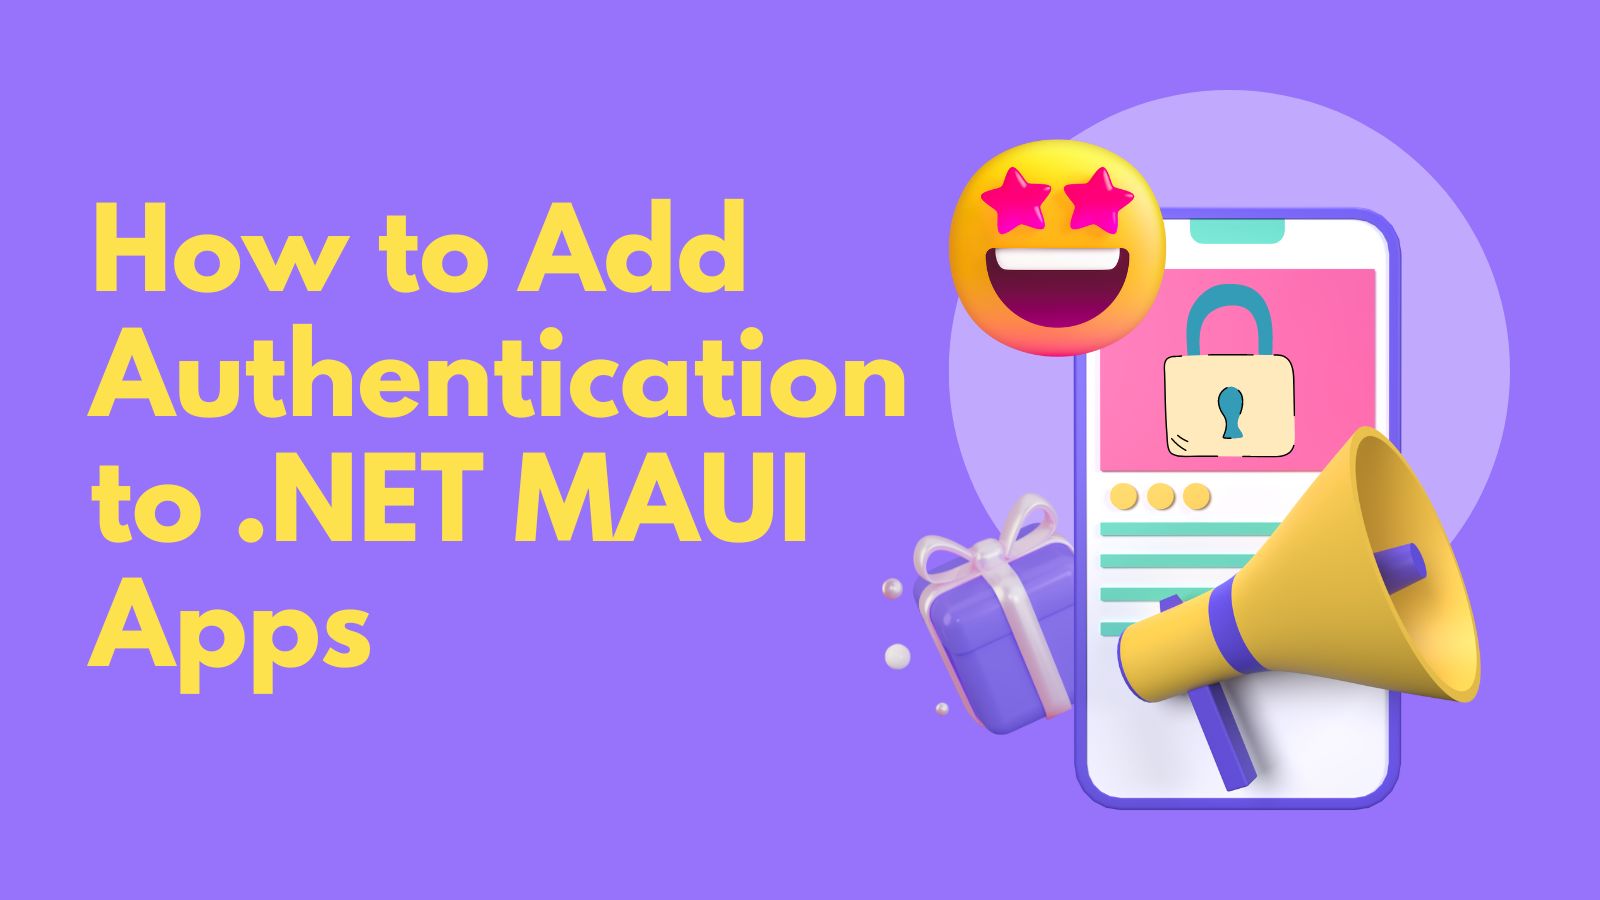 How to Add Authentication to .NET MAUI Apps